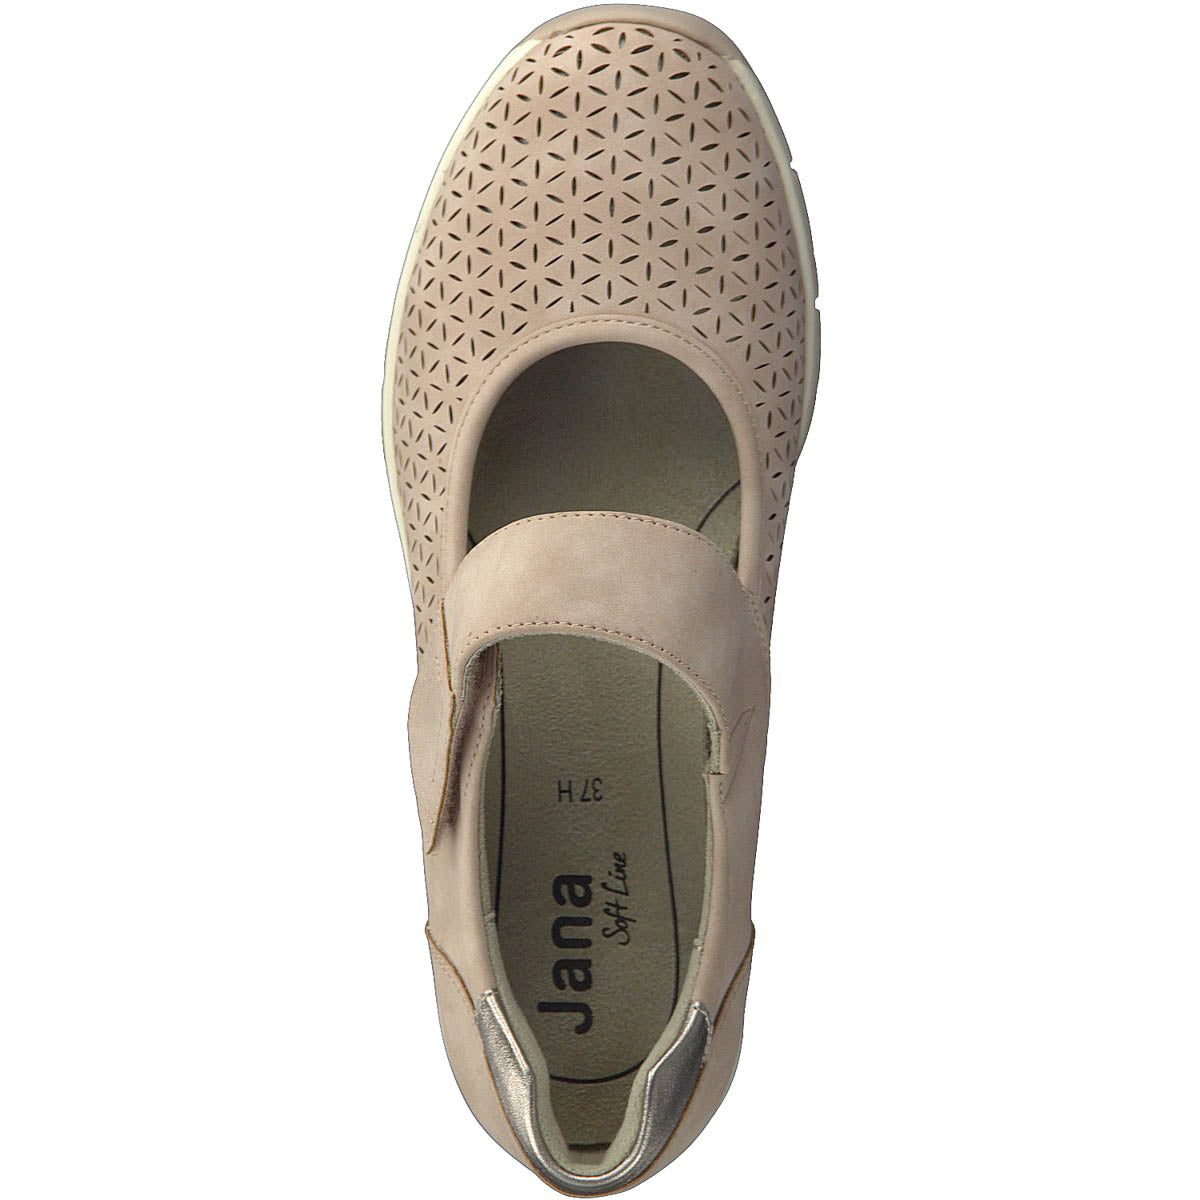 Top view displaying the rounded toe and velcro strap of the soft pink shoe.